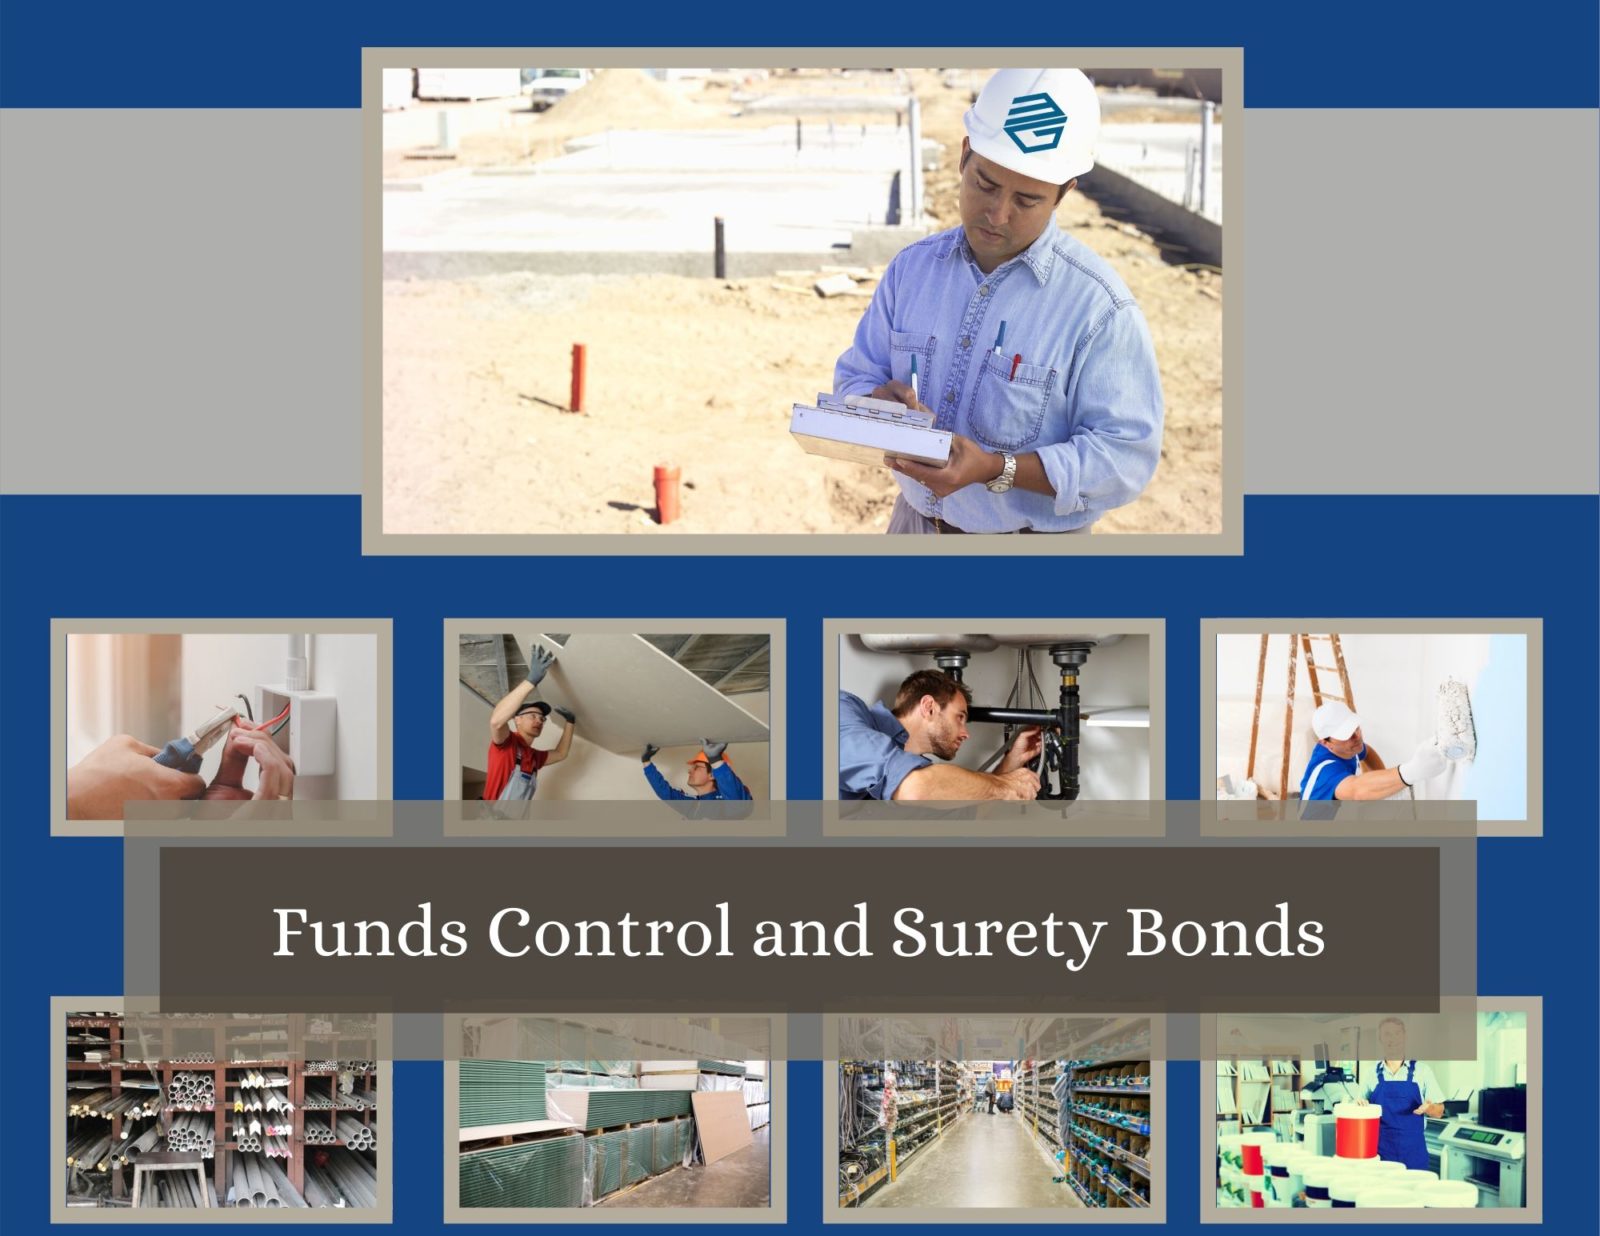 Funds Control and Surety Bonds - Picture of a General Contractor Up top. Below him are 4 pictures of subcontractors. Below them are 4 pictures of material suppliers. The words "funds control and surety bonds" in the middle. Blue background with beige borders